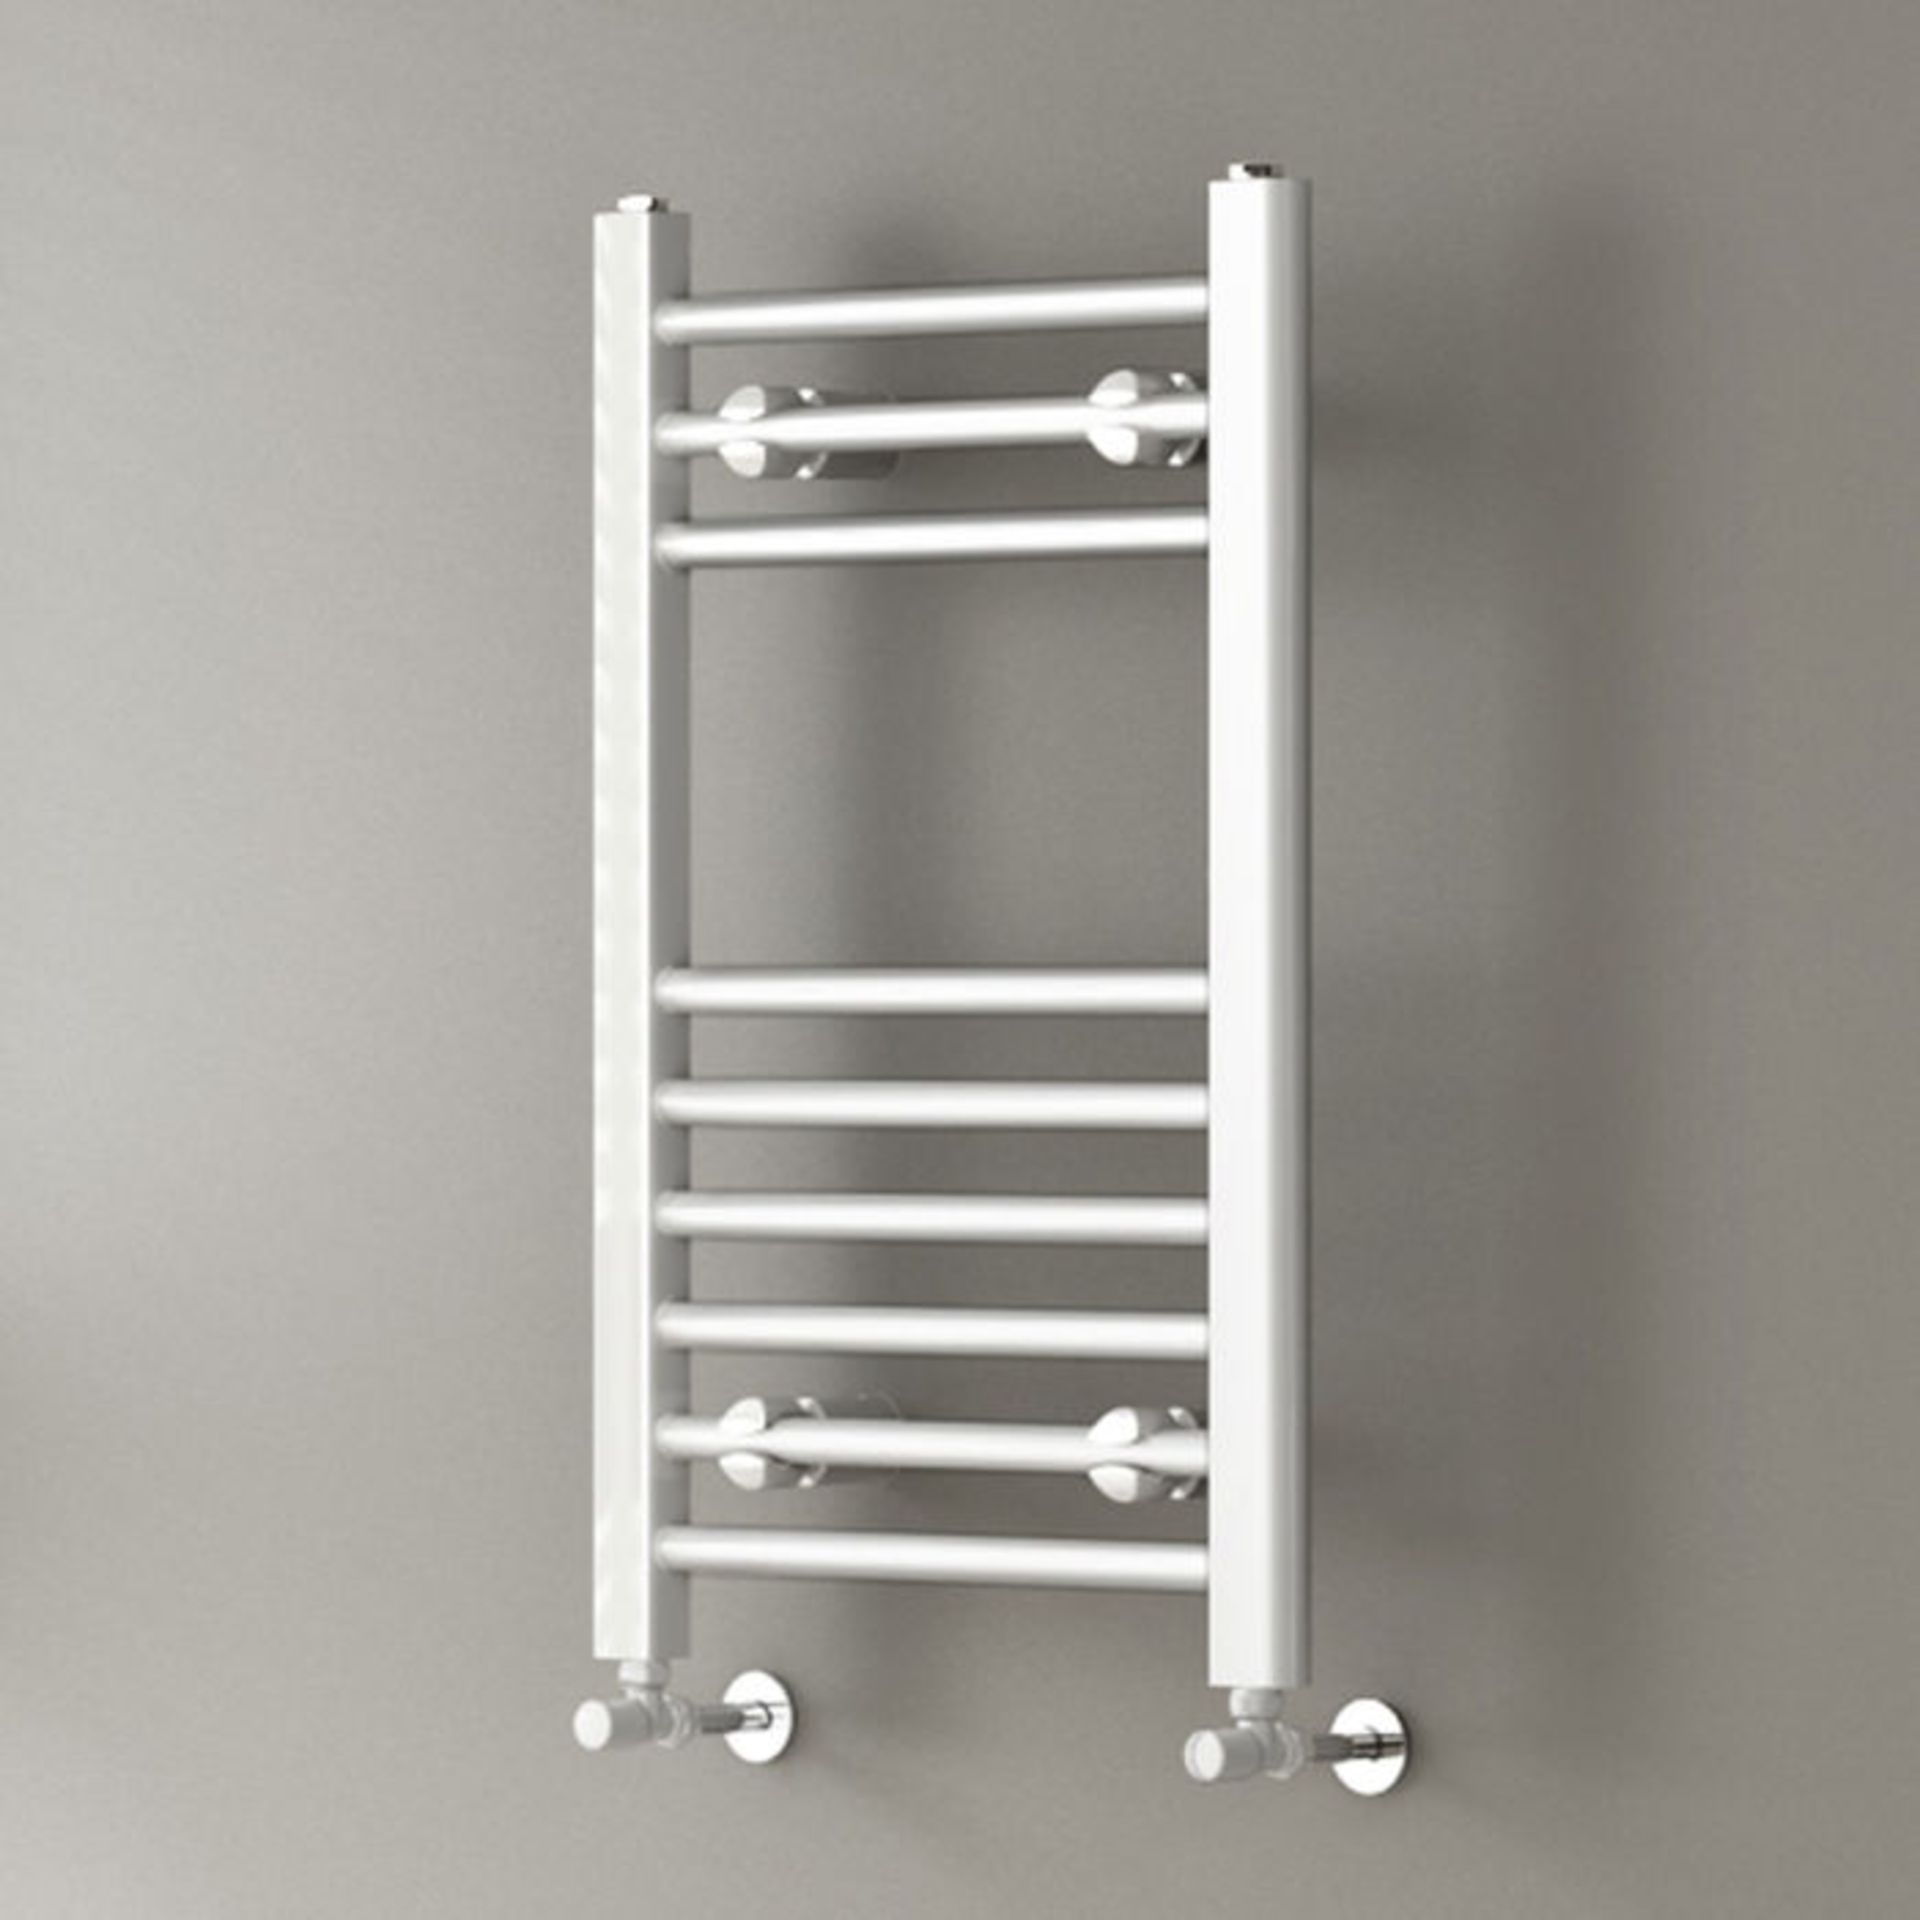 (P182) 650x400mm White Straight Rail Ladder Towel Radiator. Made from low carbon steel Finished with